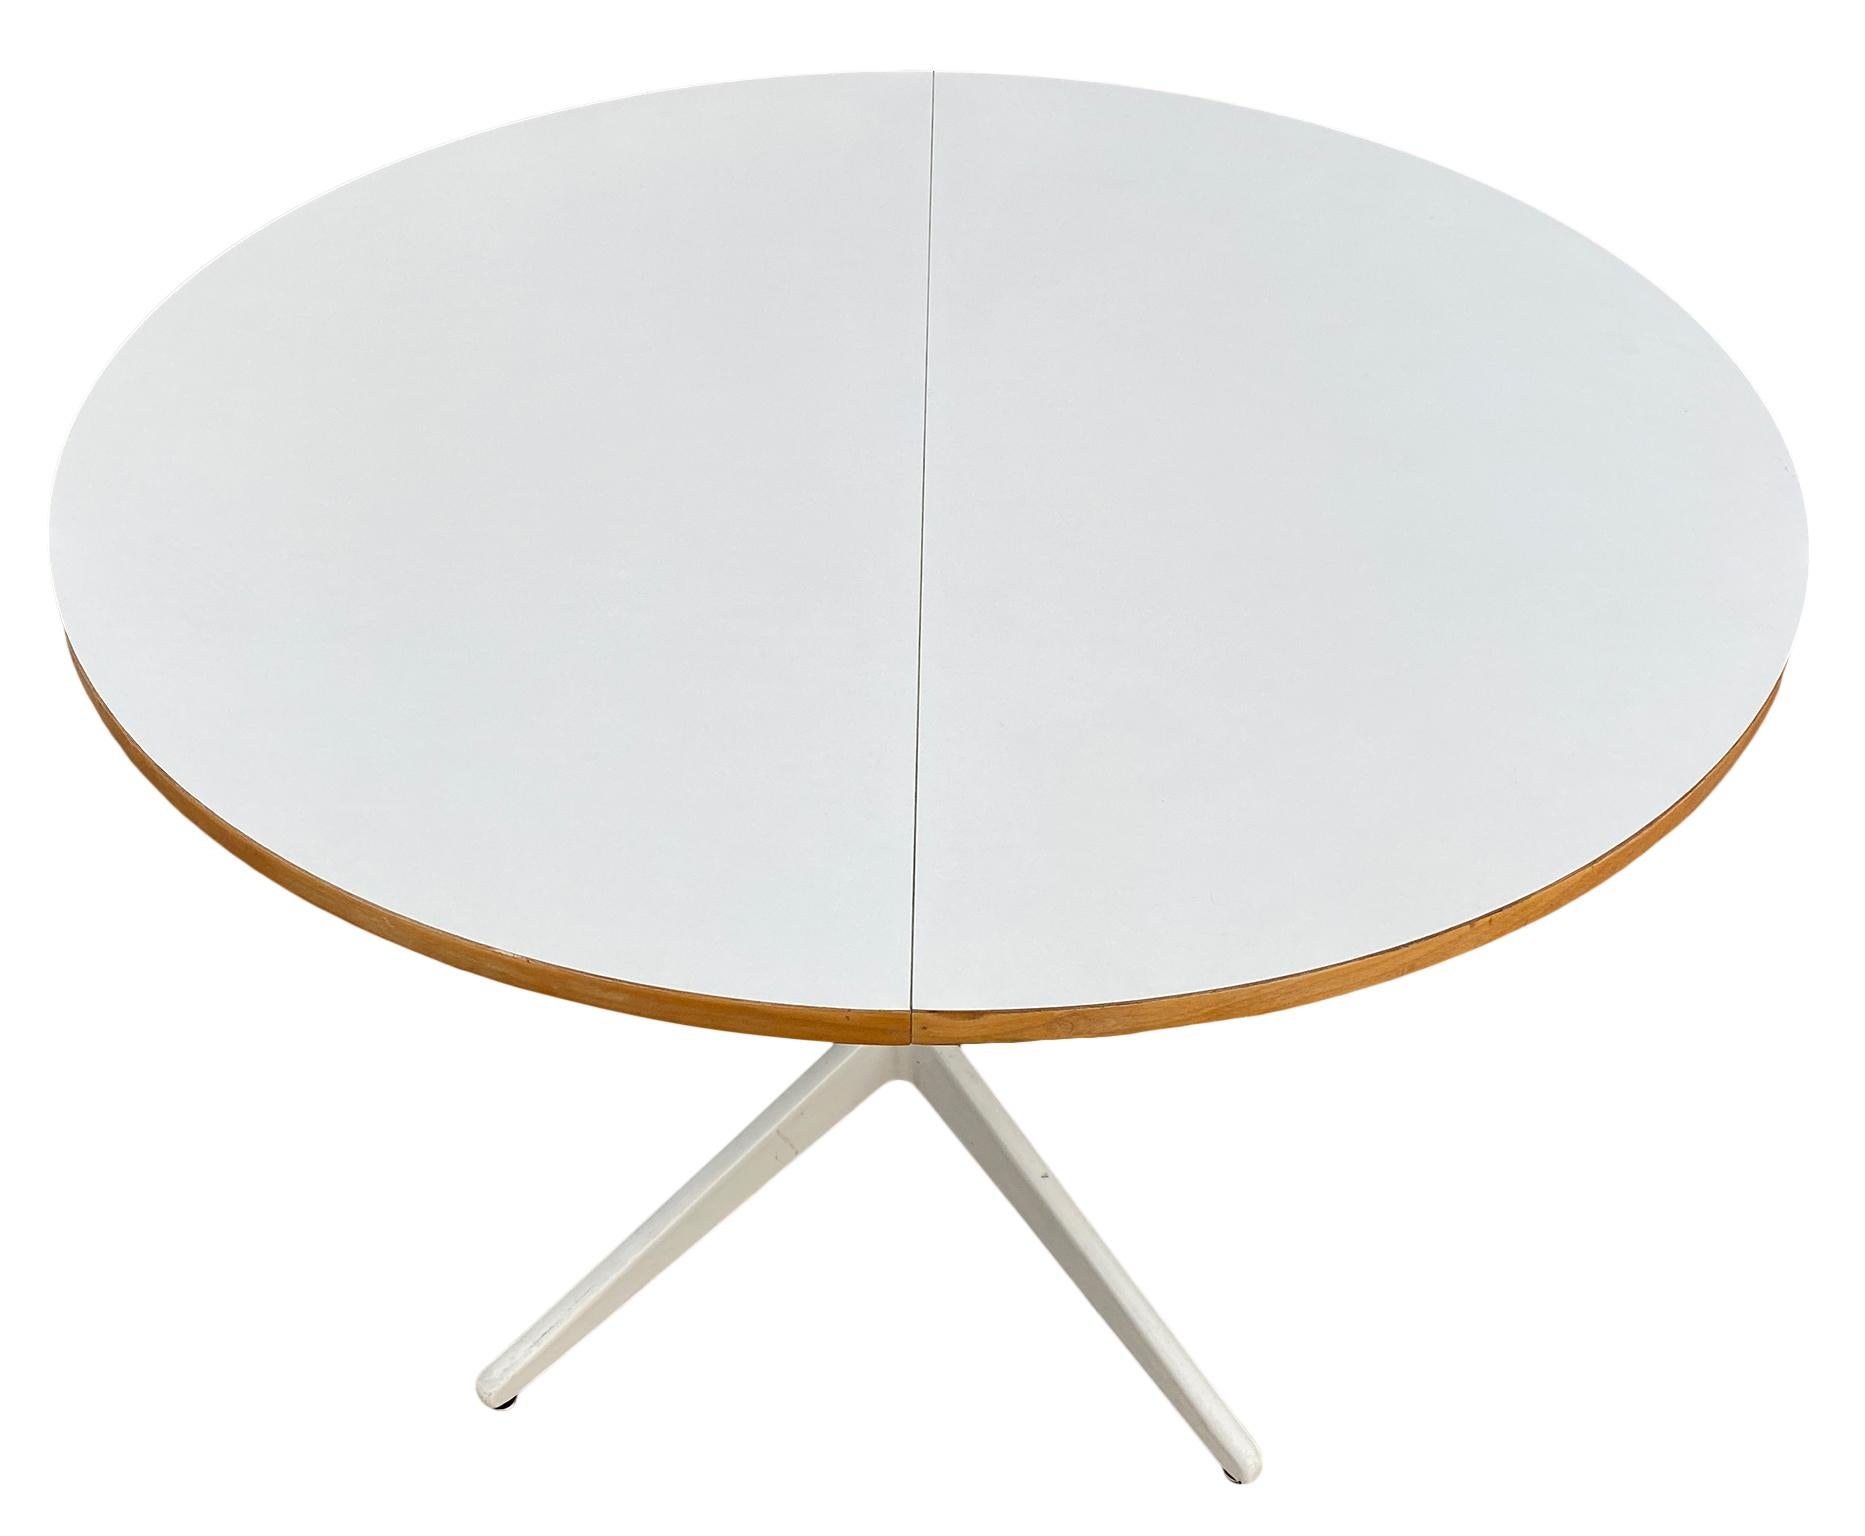 Rare Mid-Century Modern American George Nelson for Herman Miller expandable round dining table. Beautiful White Laminate table top. Solid Powder coated metal table base. Made circa 1960. Original White Laminate top with maple veneer sides in good